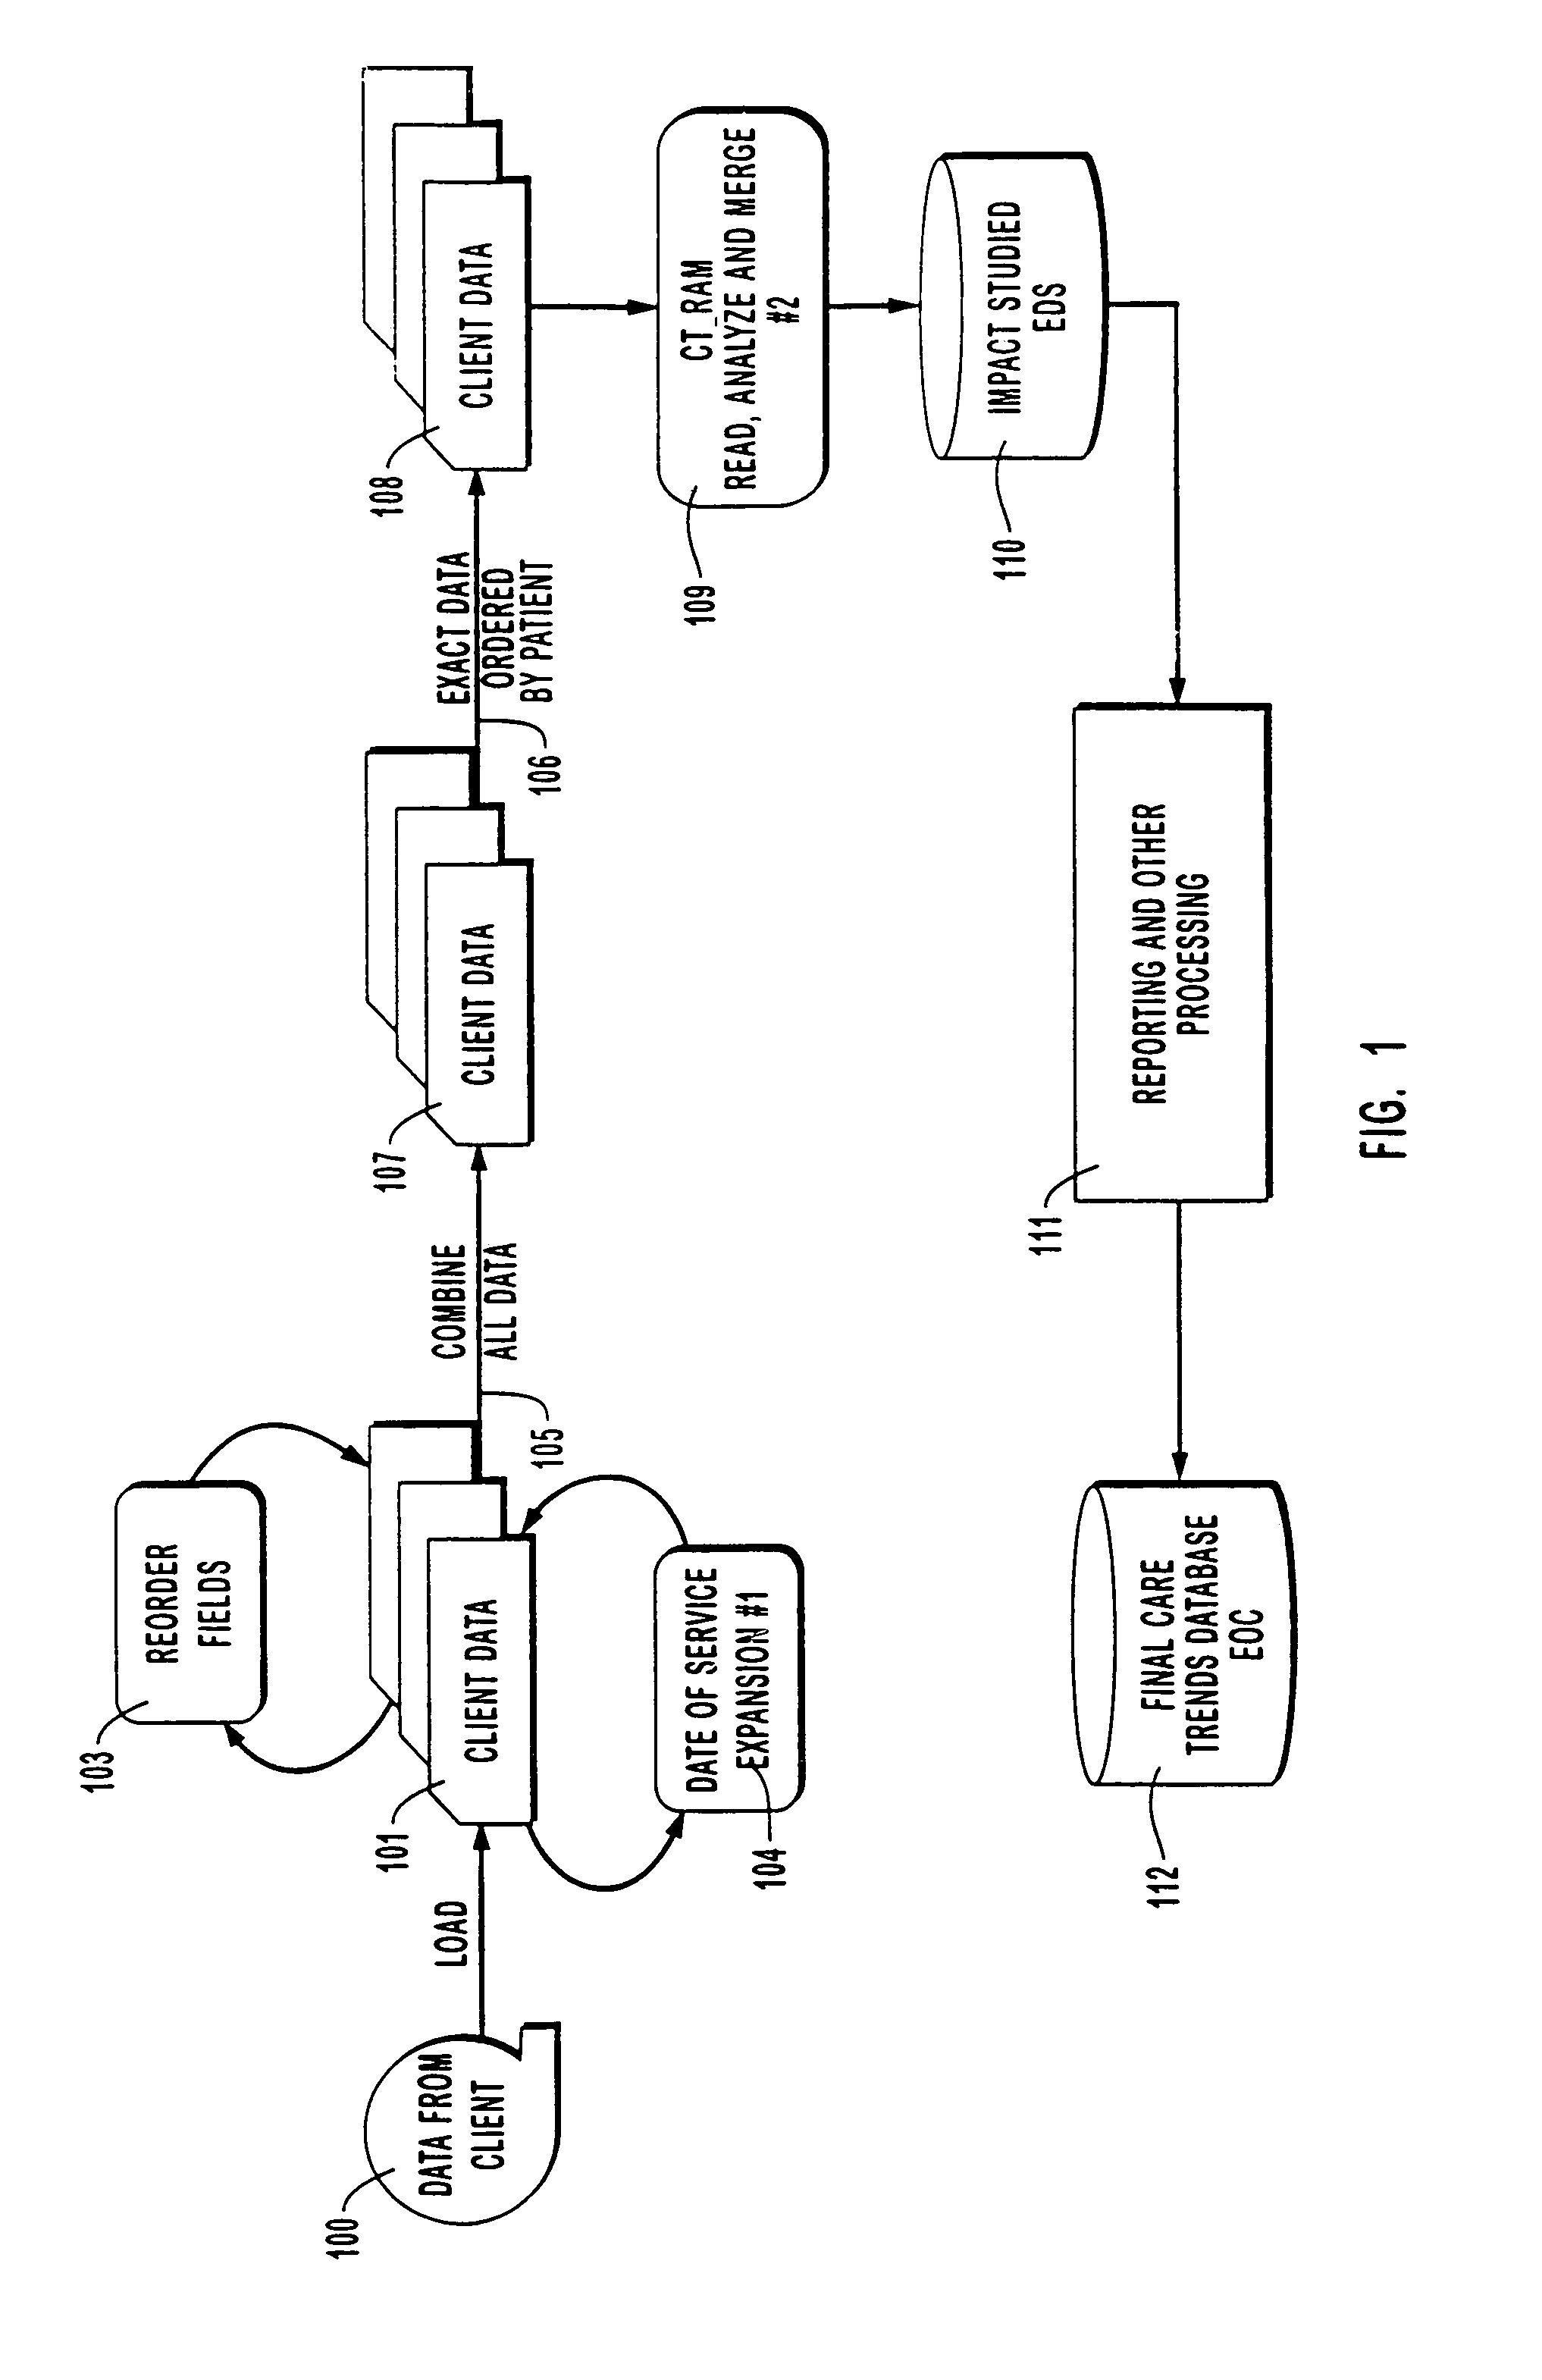 Method and system for generating statistically-based medical provider utilization profiles